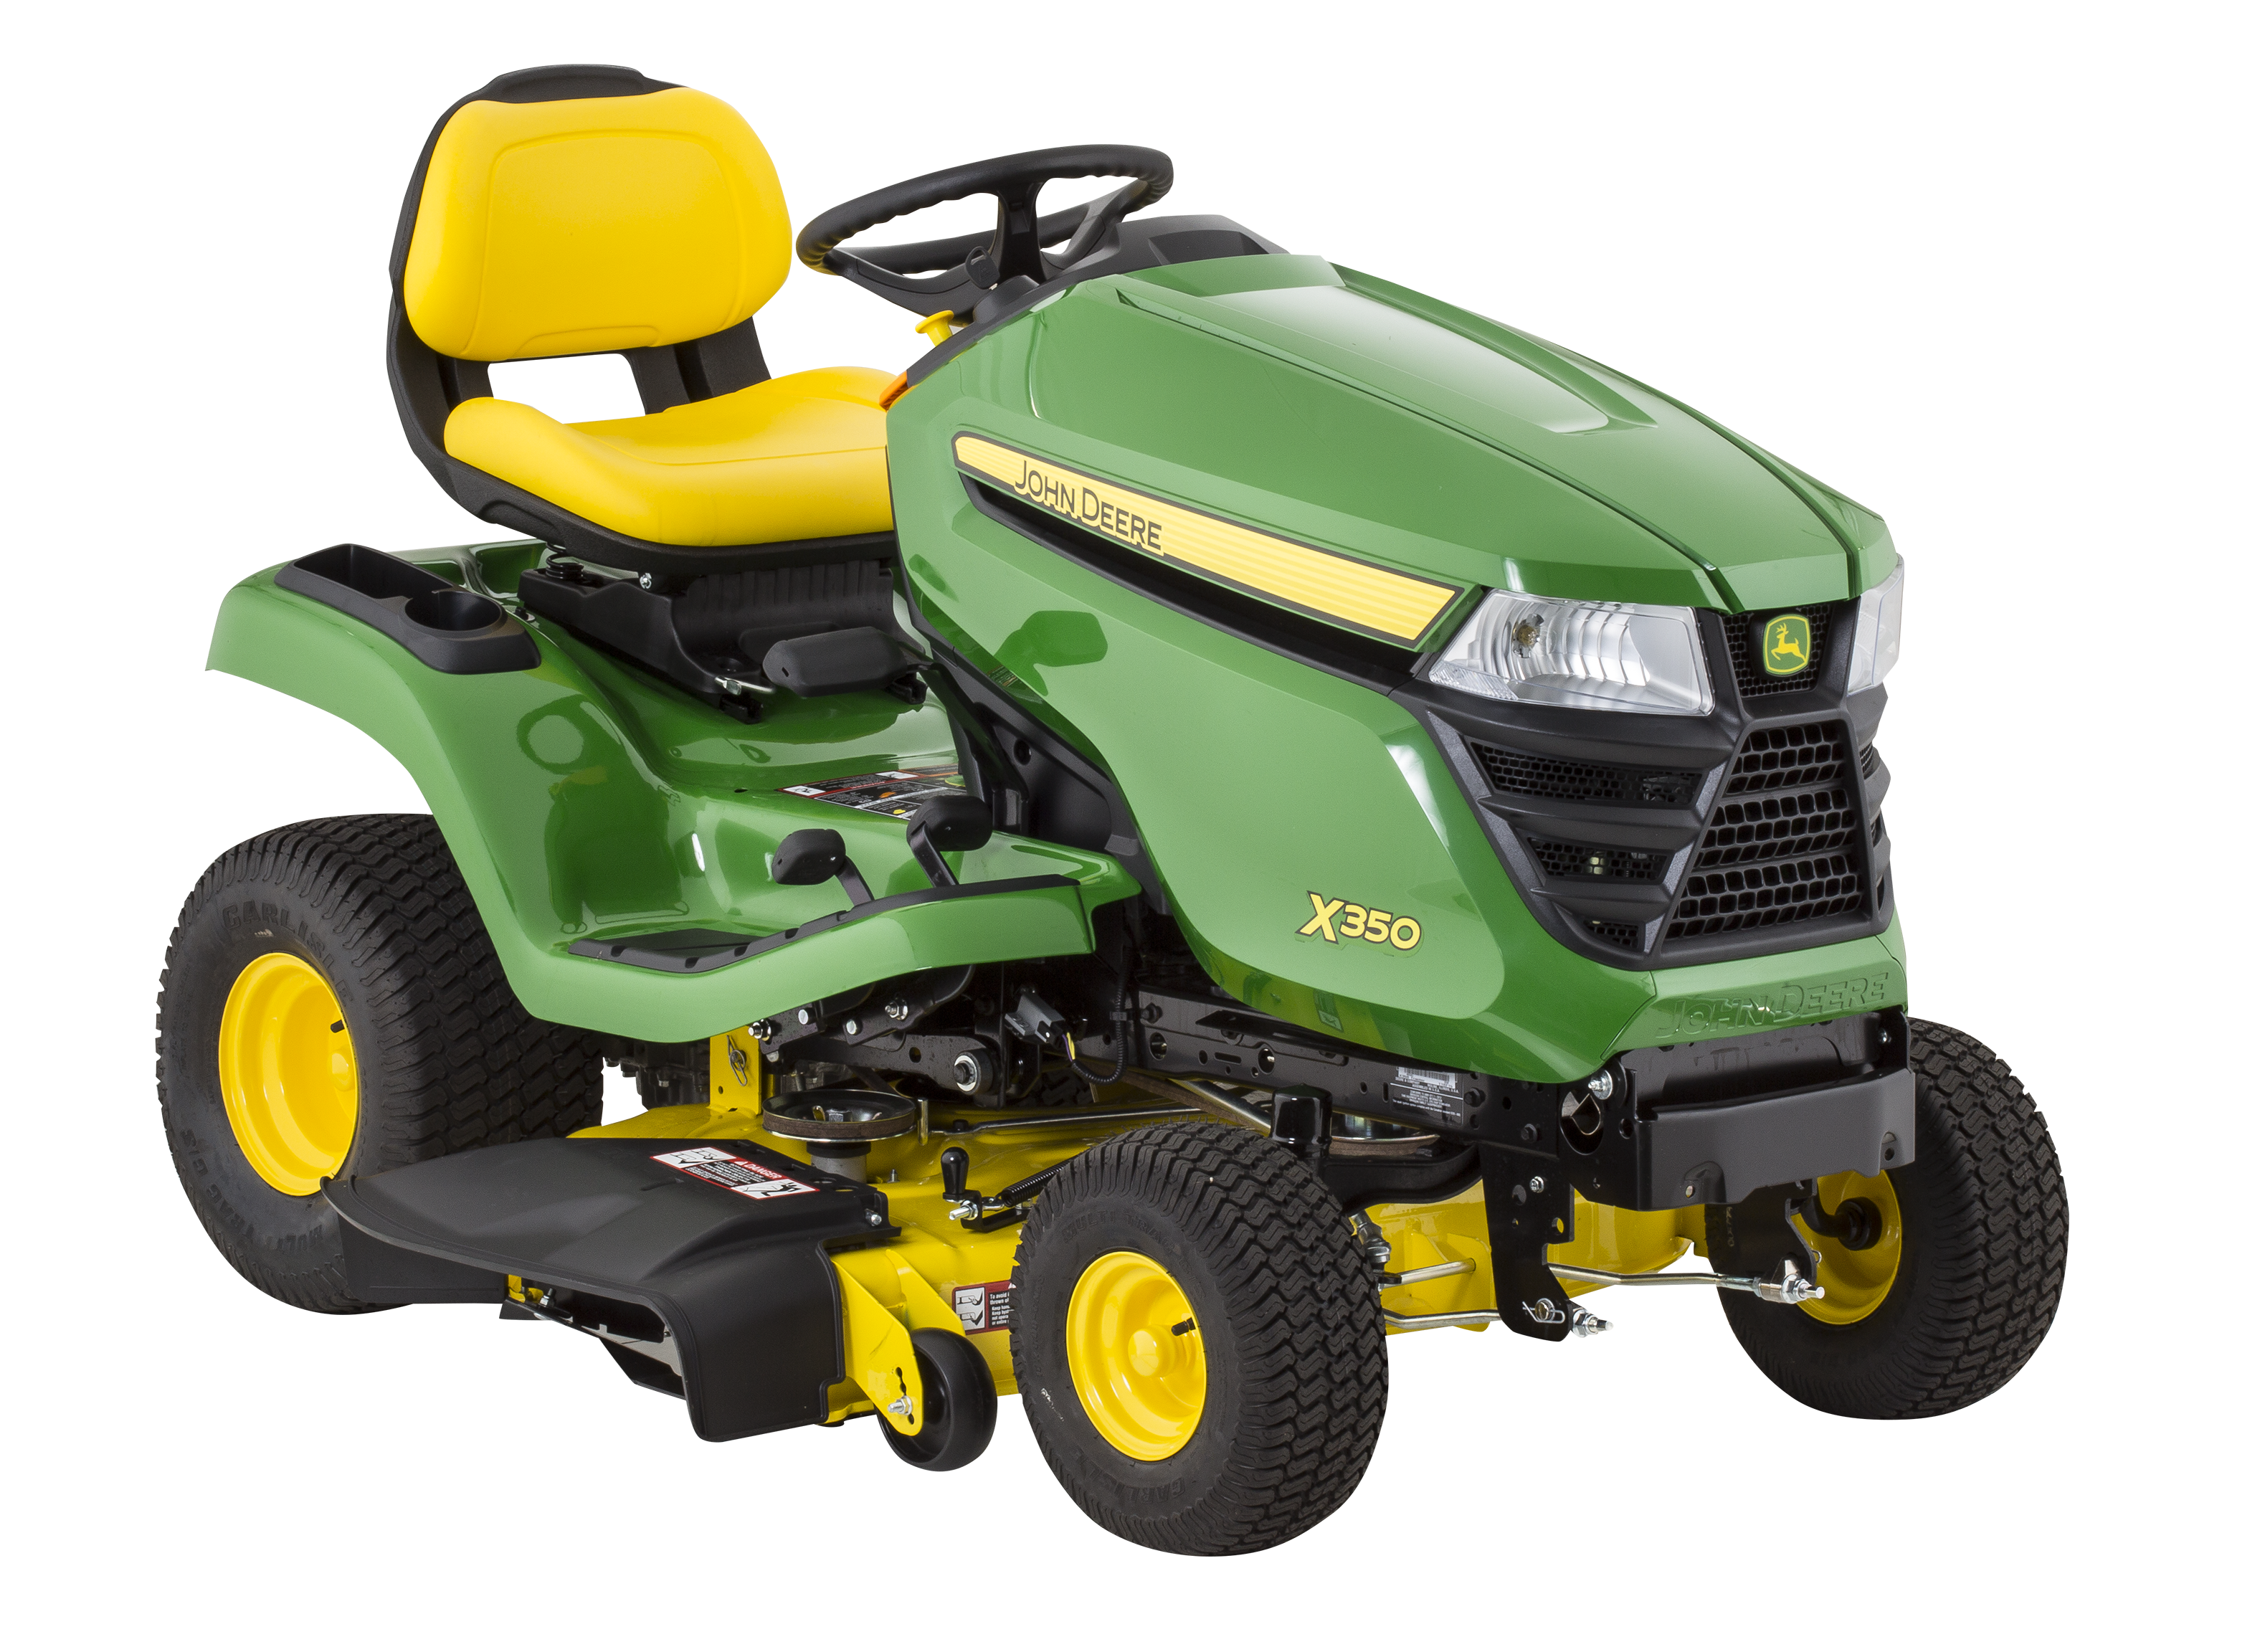 John Deere X350-42 Lawn Mower & Tractor Review - Consumer Reports